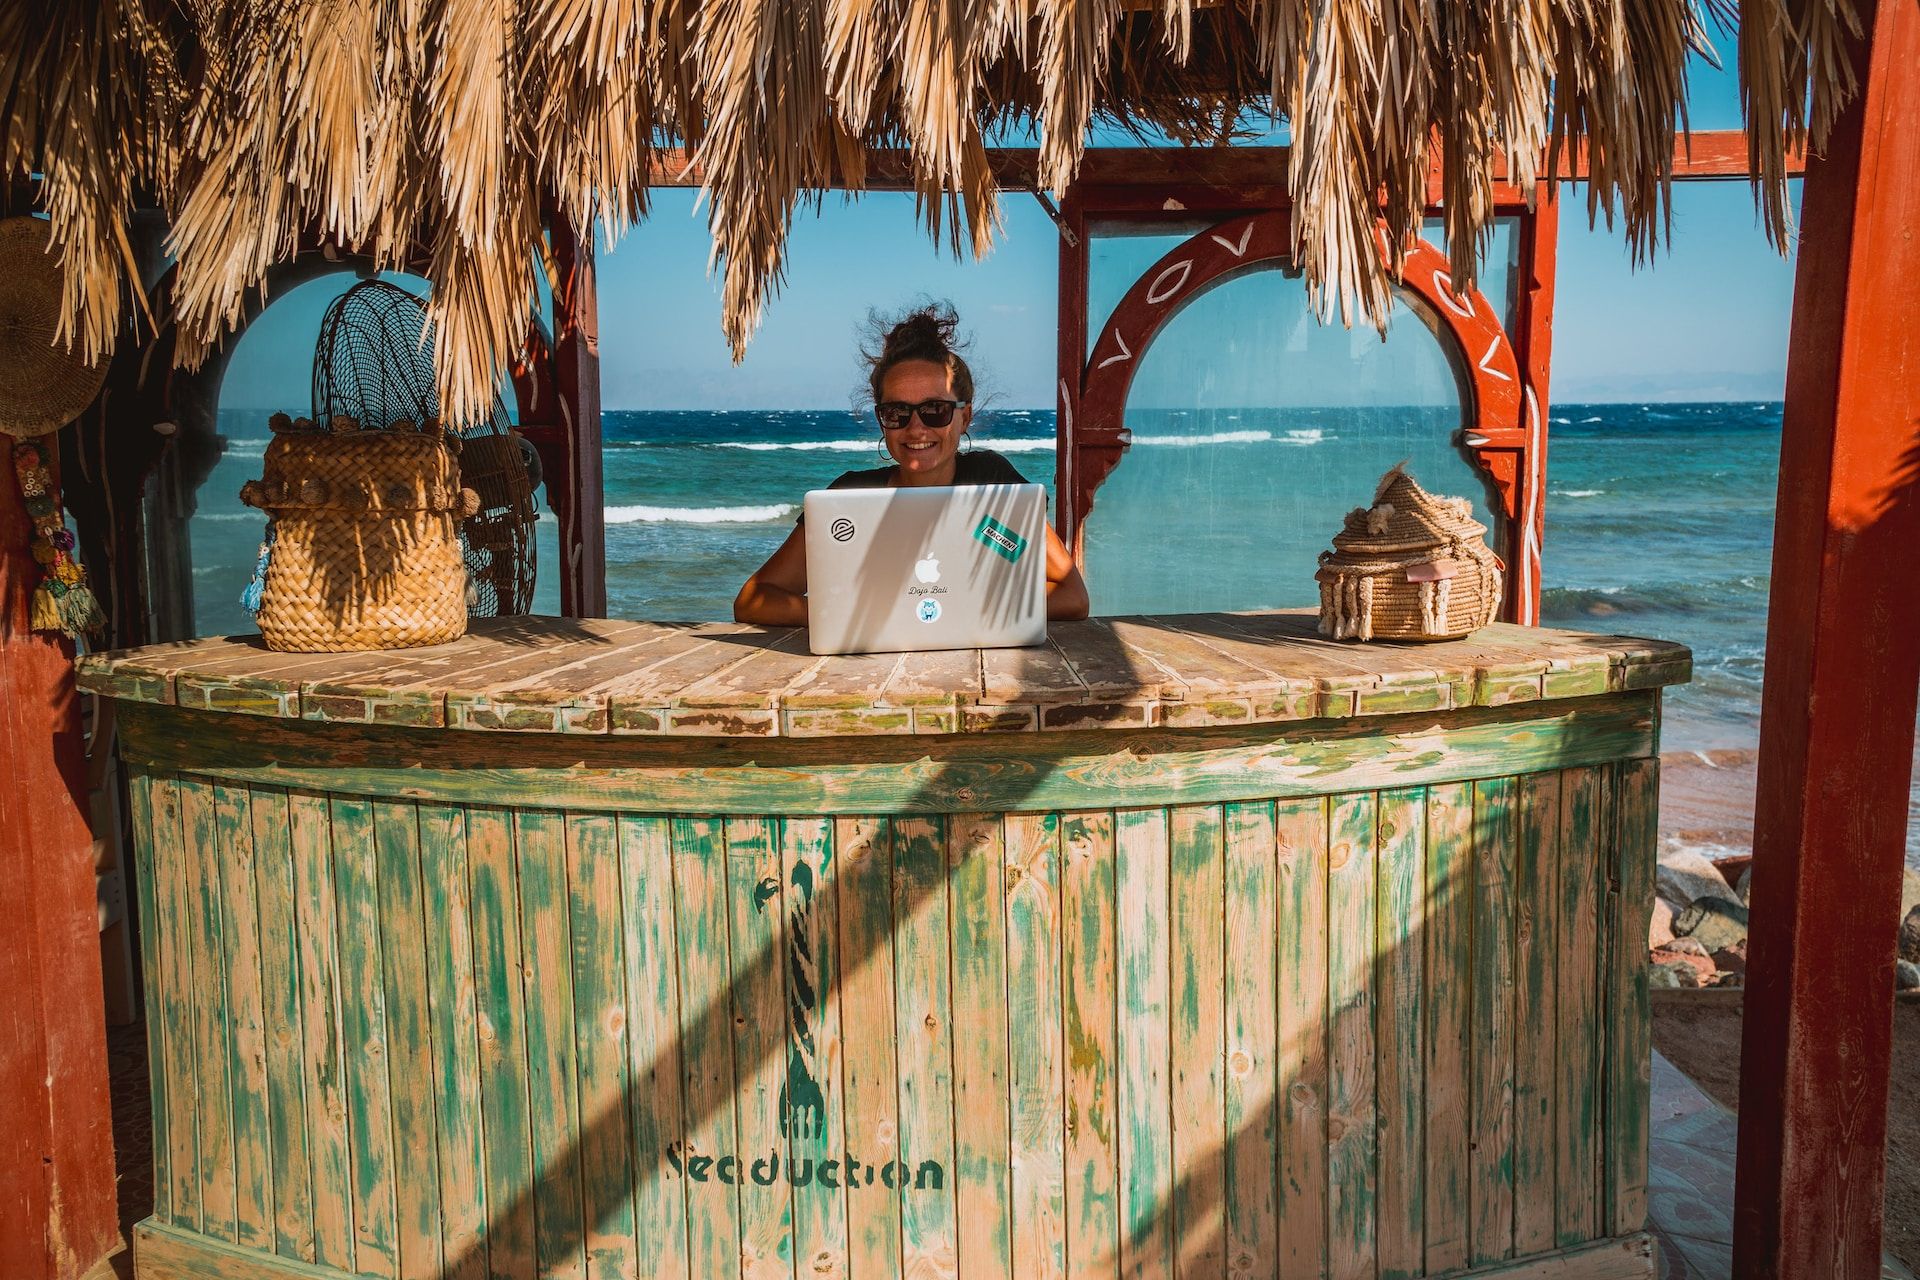 A digital nomad on a laptop in Dahab, Egypt